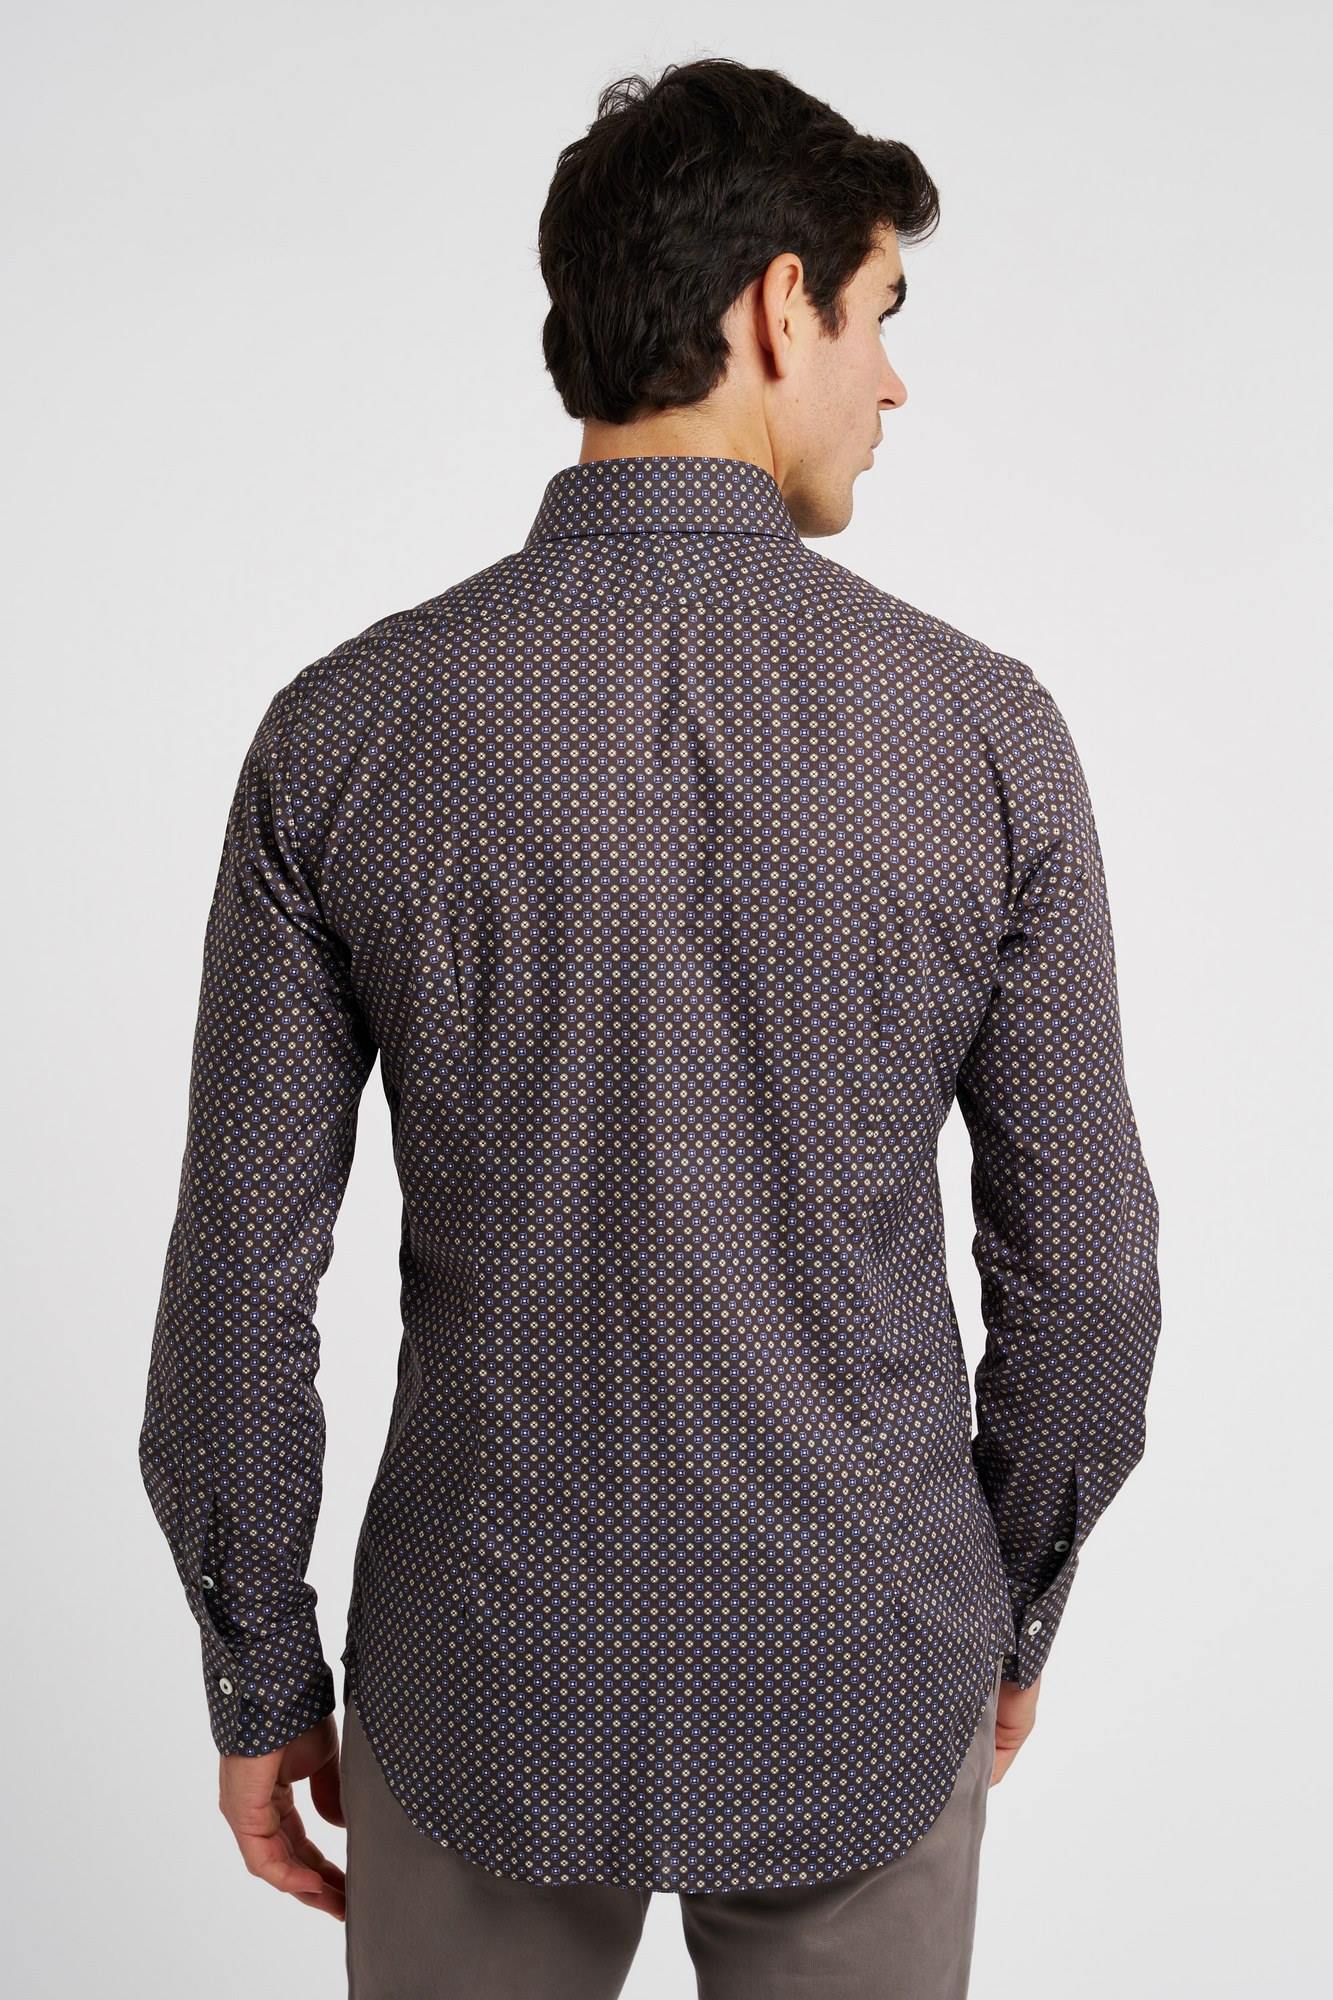 Alessandro Gherardi Patterned Cotton Shirt Brown-4